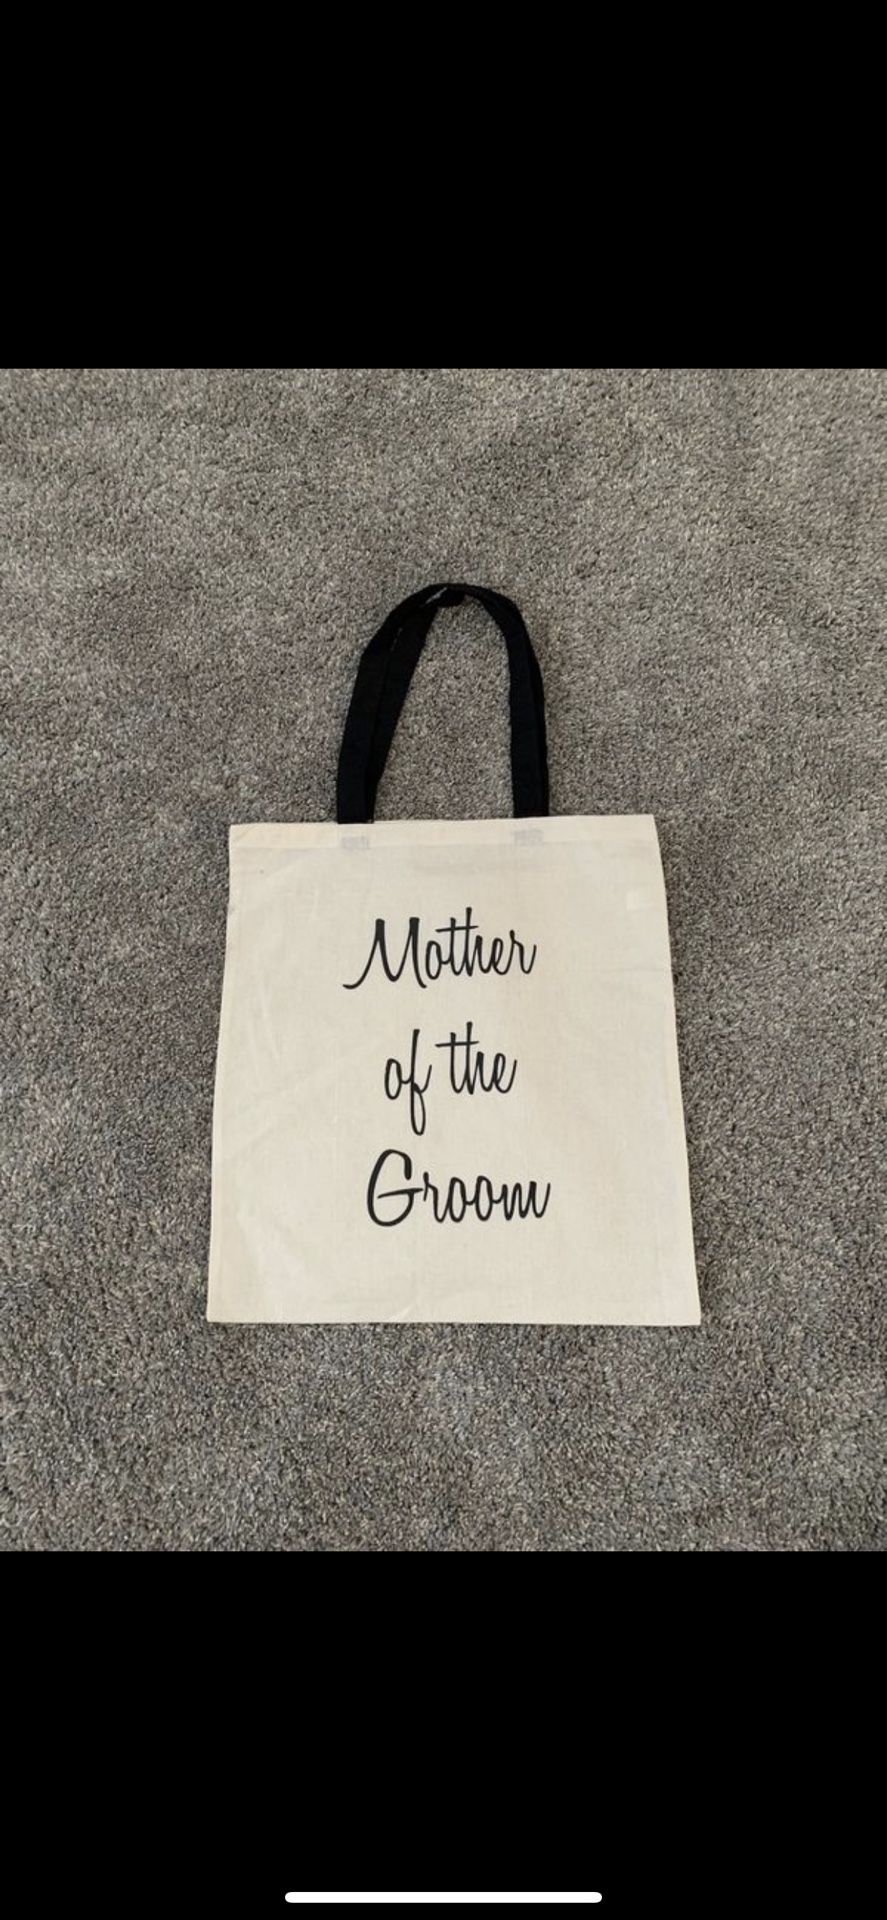 Mother of the Groom tote bag